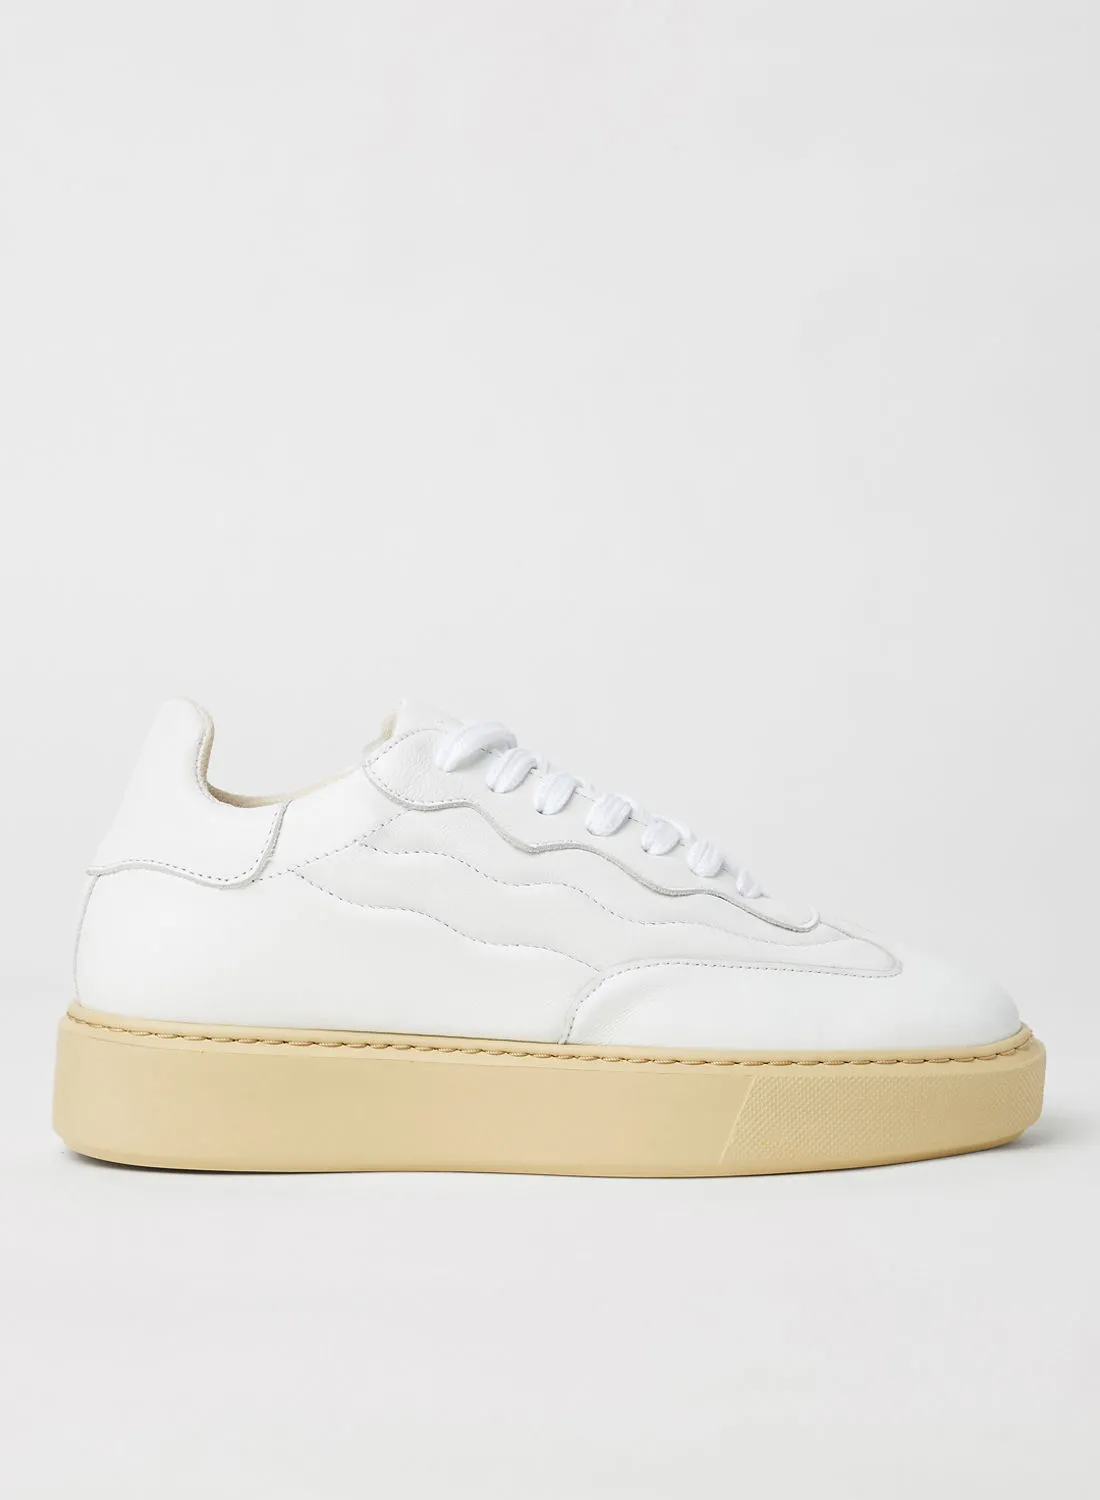 SELECTED FEMME Stitch Detail Leather Sneakers White